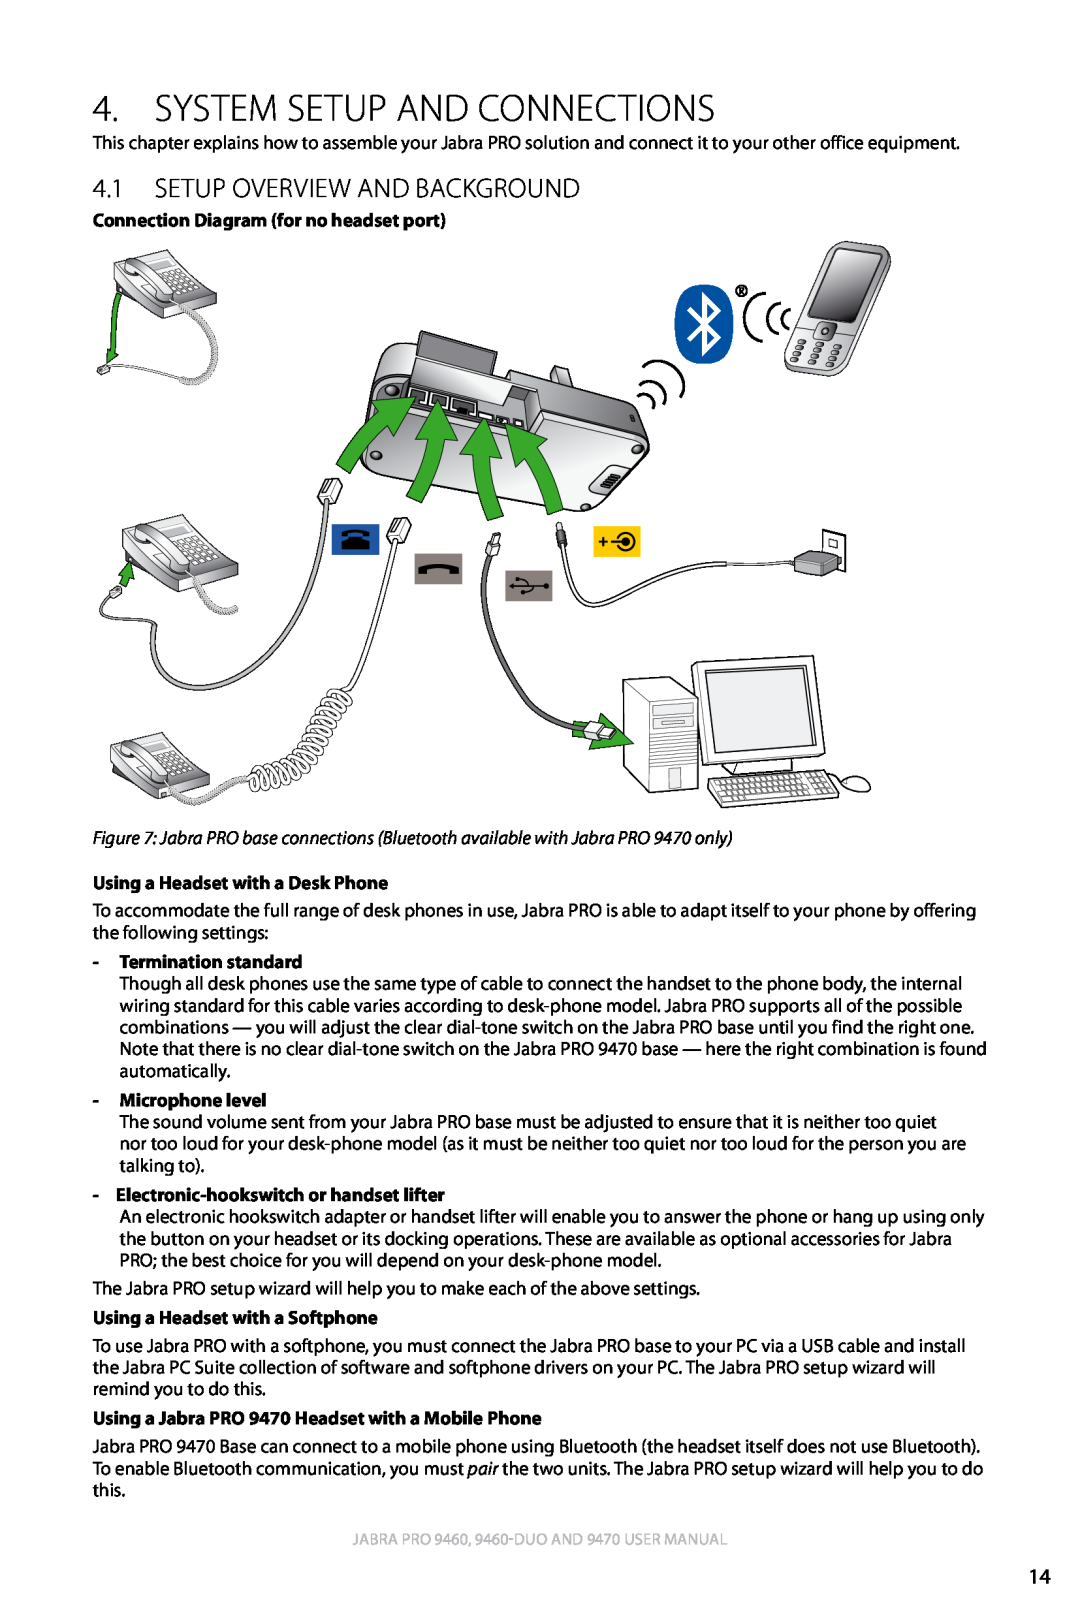 Lennox Hearth 9470 user manual System Setup and Connections, 4.1Setup Overview and Background, english 